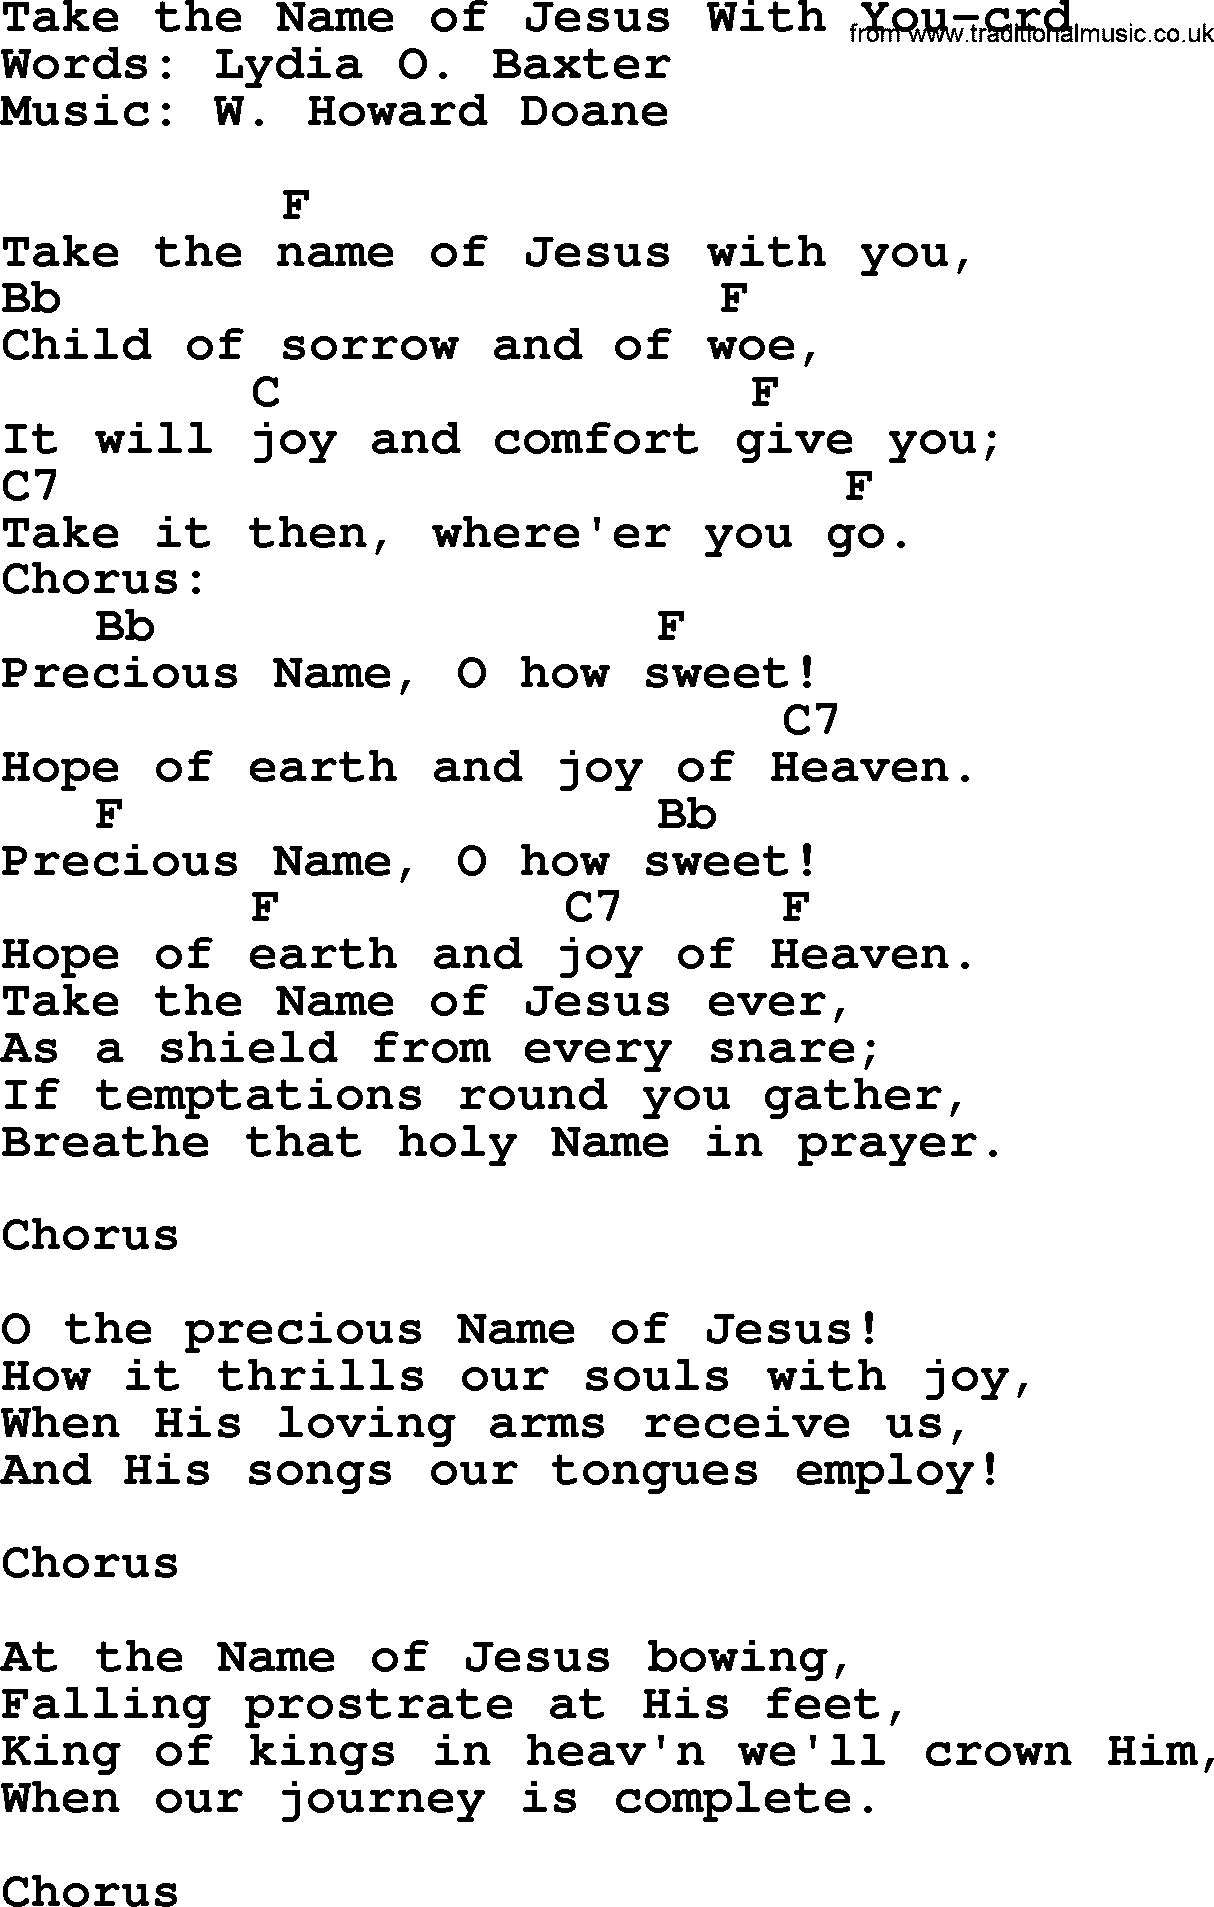 Top 500 Hymn: Take The Name Of Jesus With You, lyrics and chords